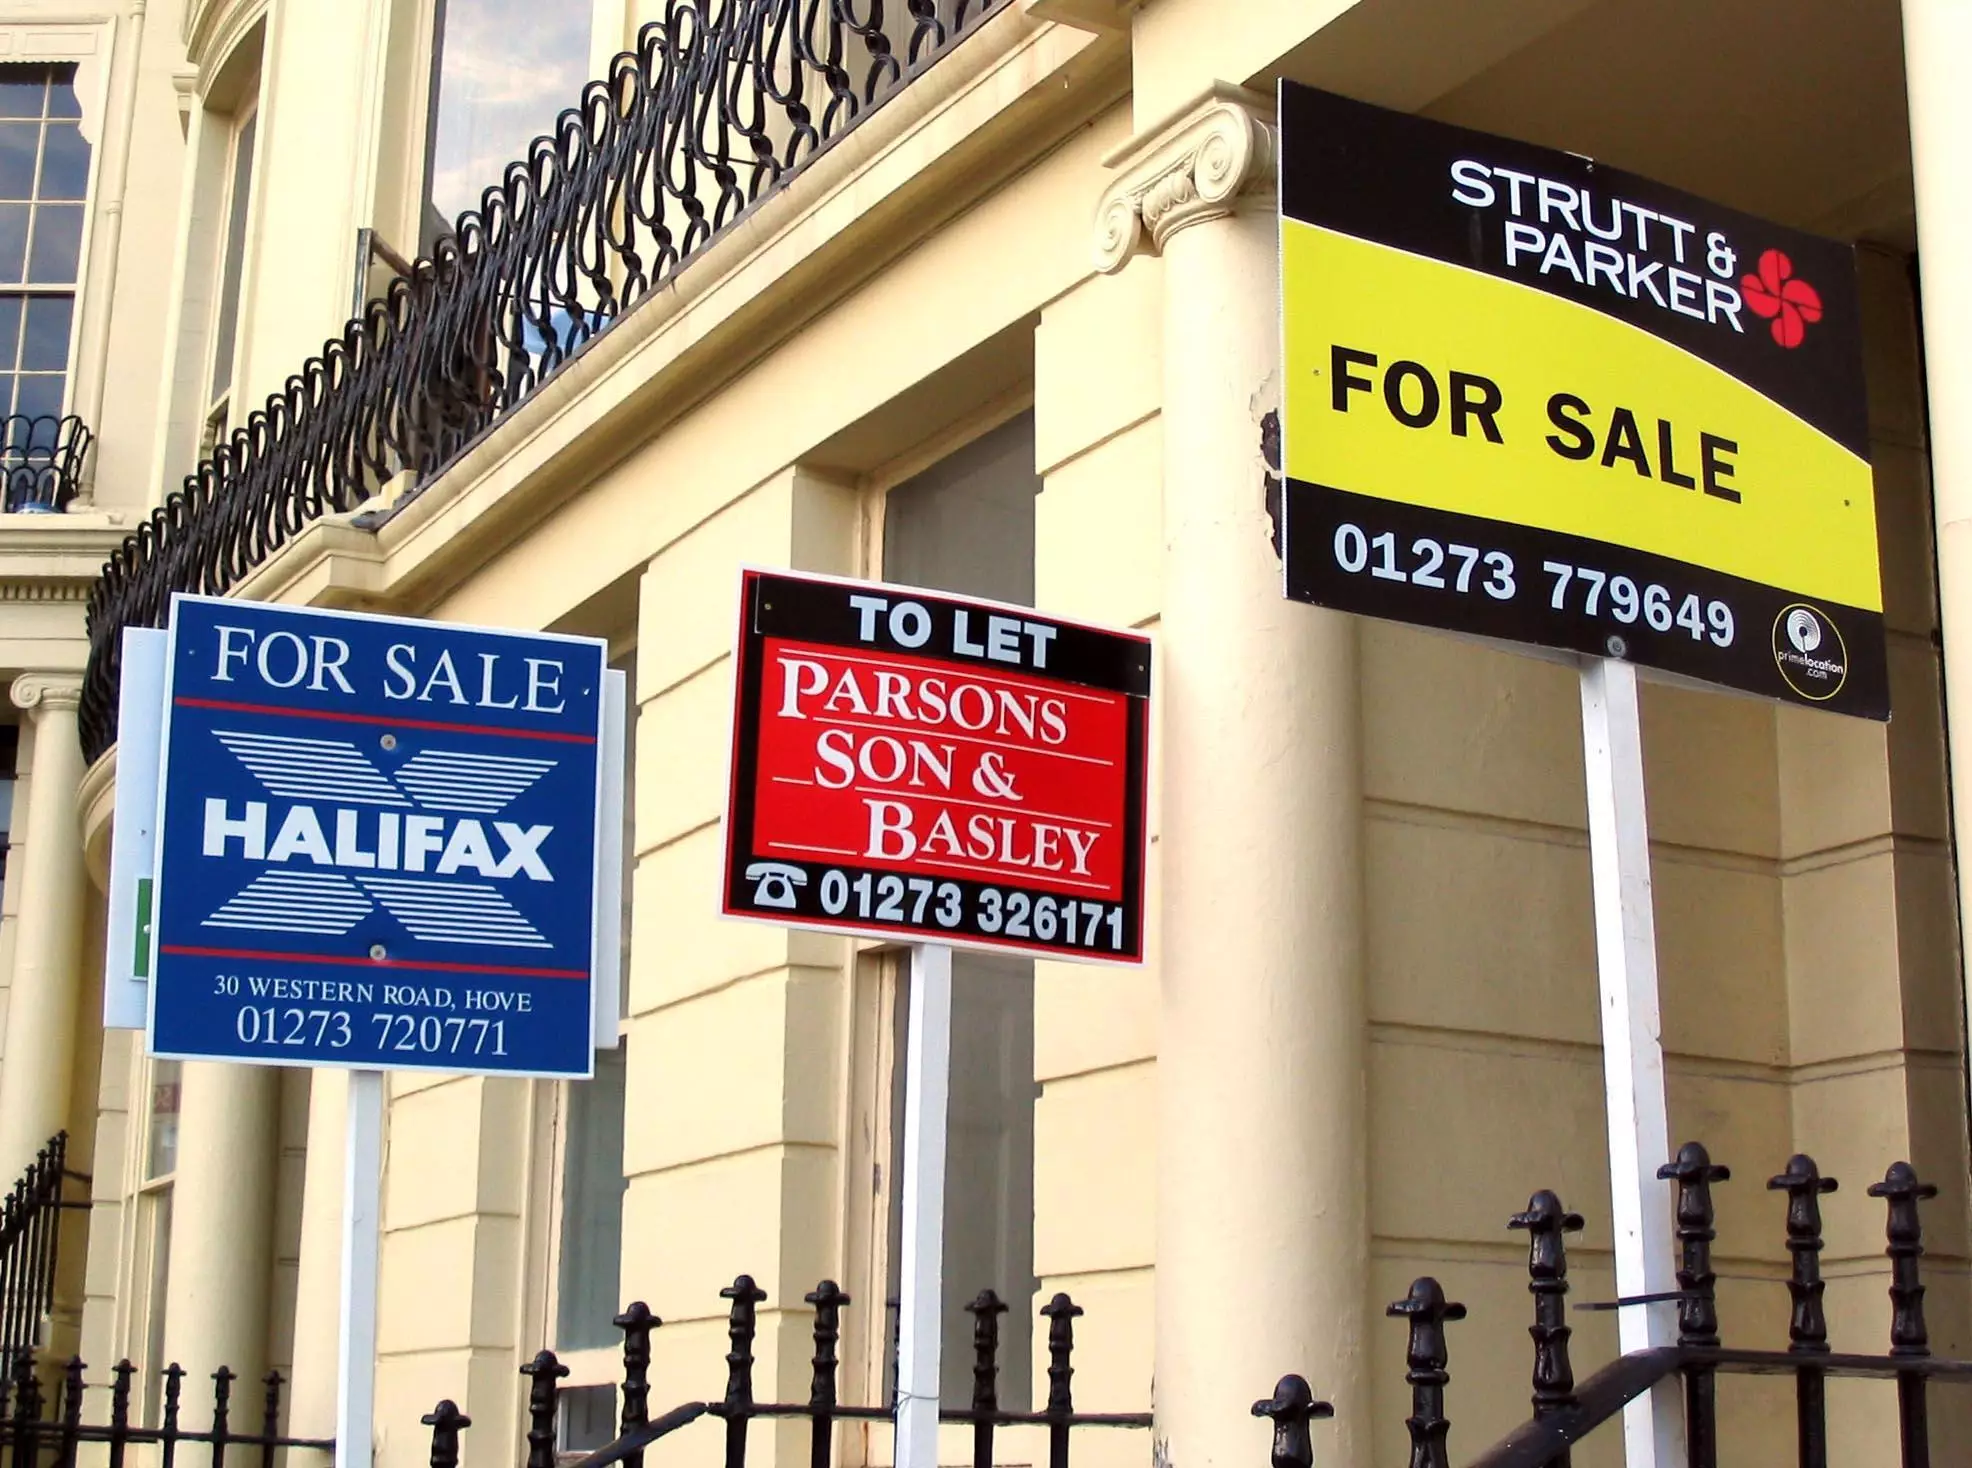 Recent figures reveal demand for home ownership has soared during lockdown (